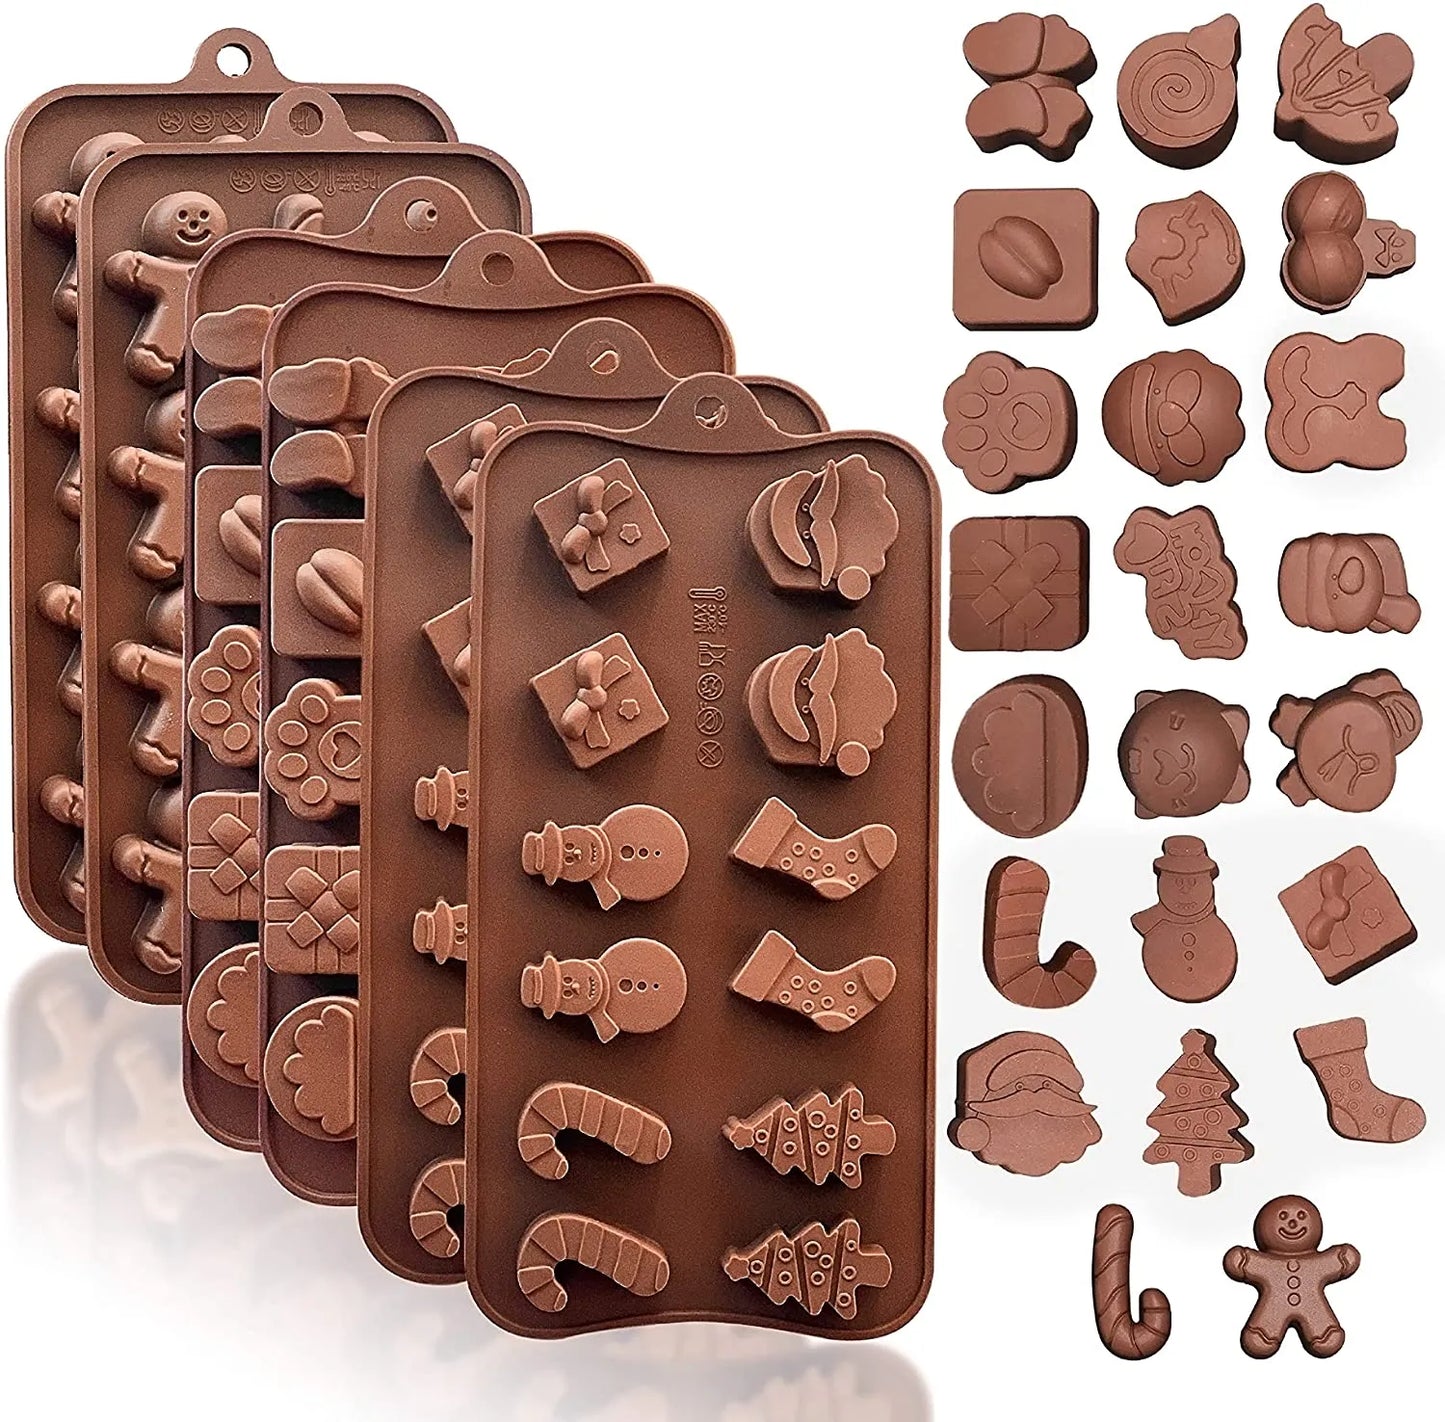 Christmas shape design Cookie Shaping Decorating Baking Trays Xmas Chocolate Mold Gingerbread Man Christmas Candy Mould